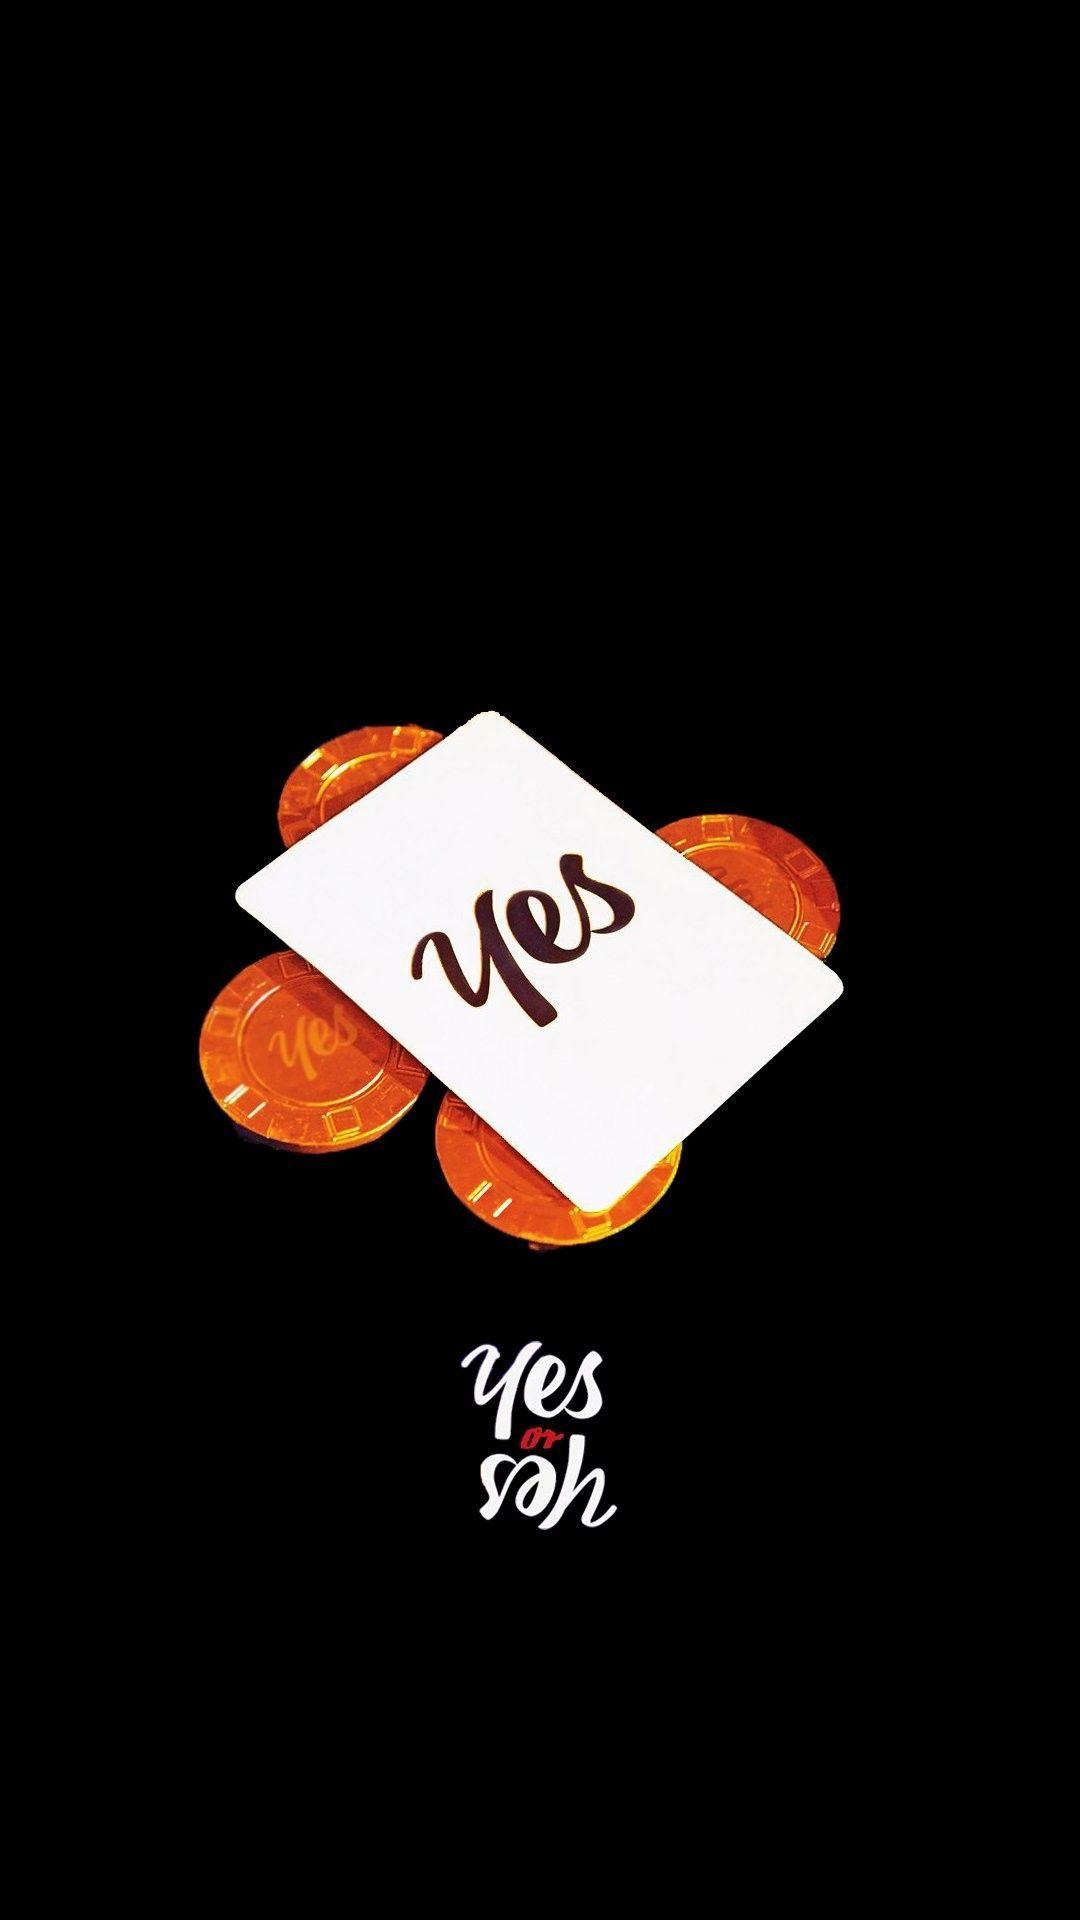 YES or YES CARD ver. Mobile wallpaper #트와이스 #TWICE #YESorYES